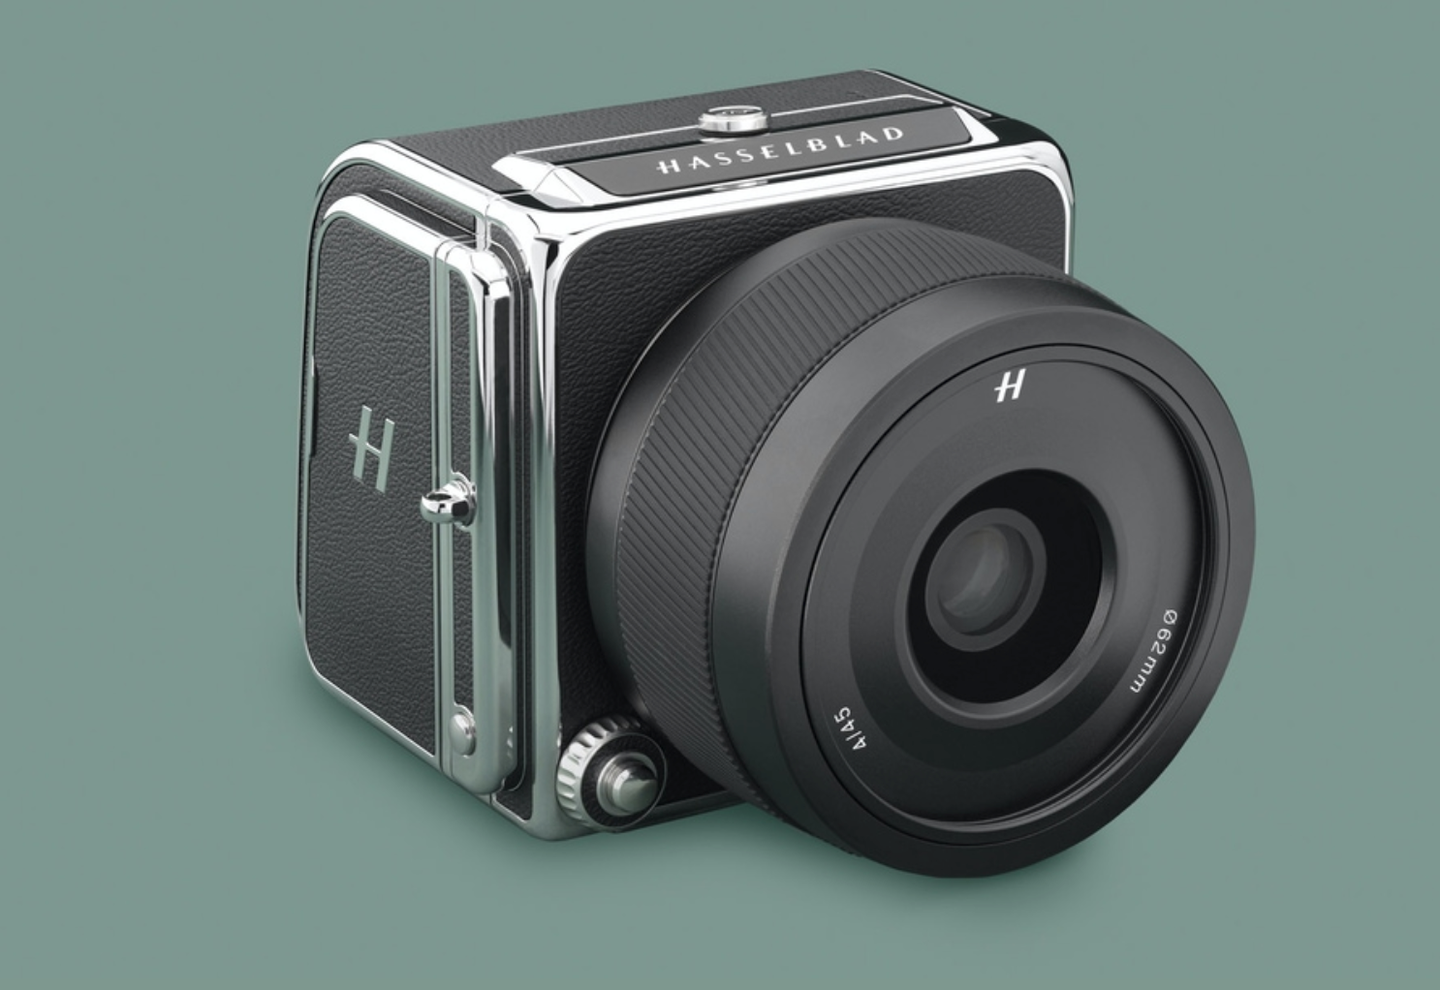 Hasselblad's new $6,400 camera is weird and wonderful | Popular